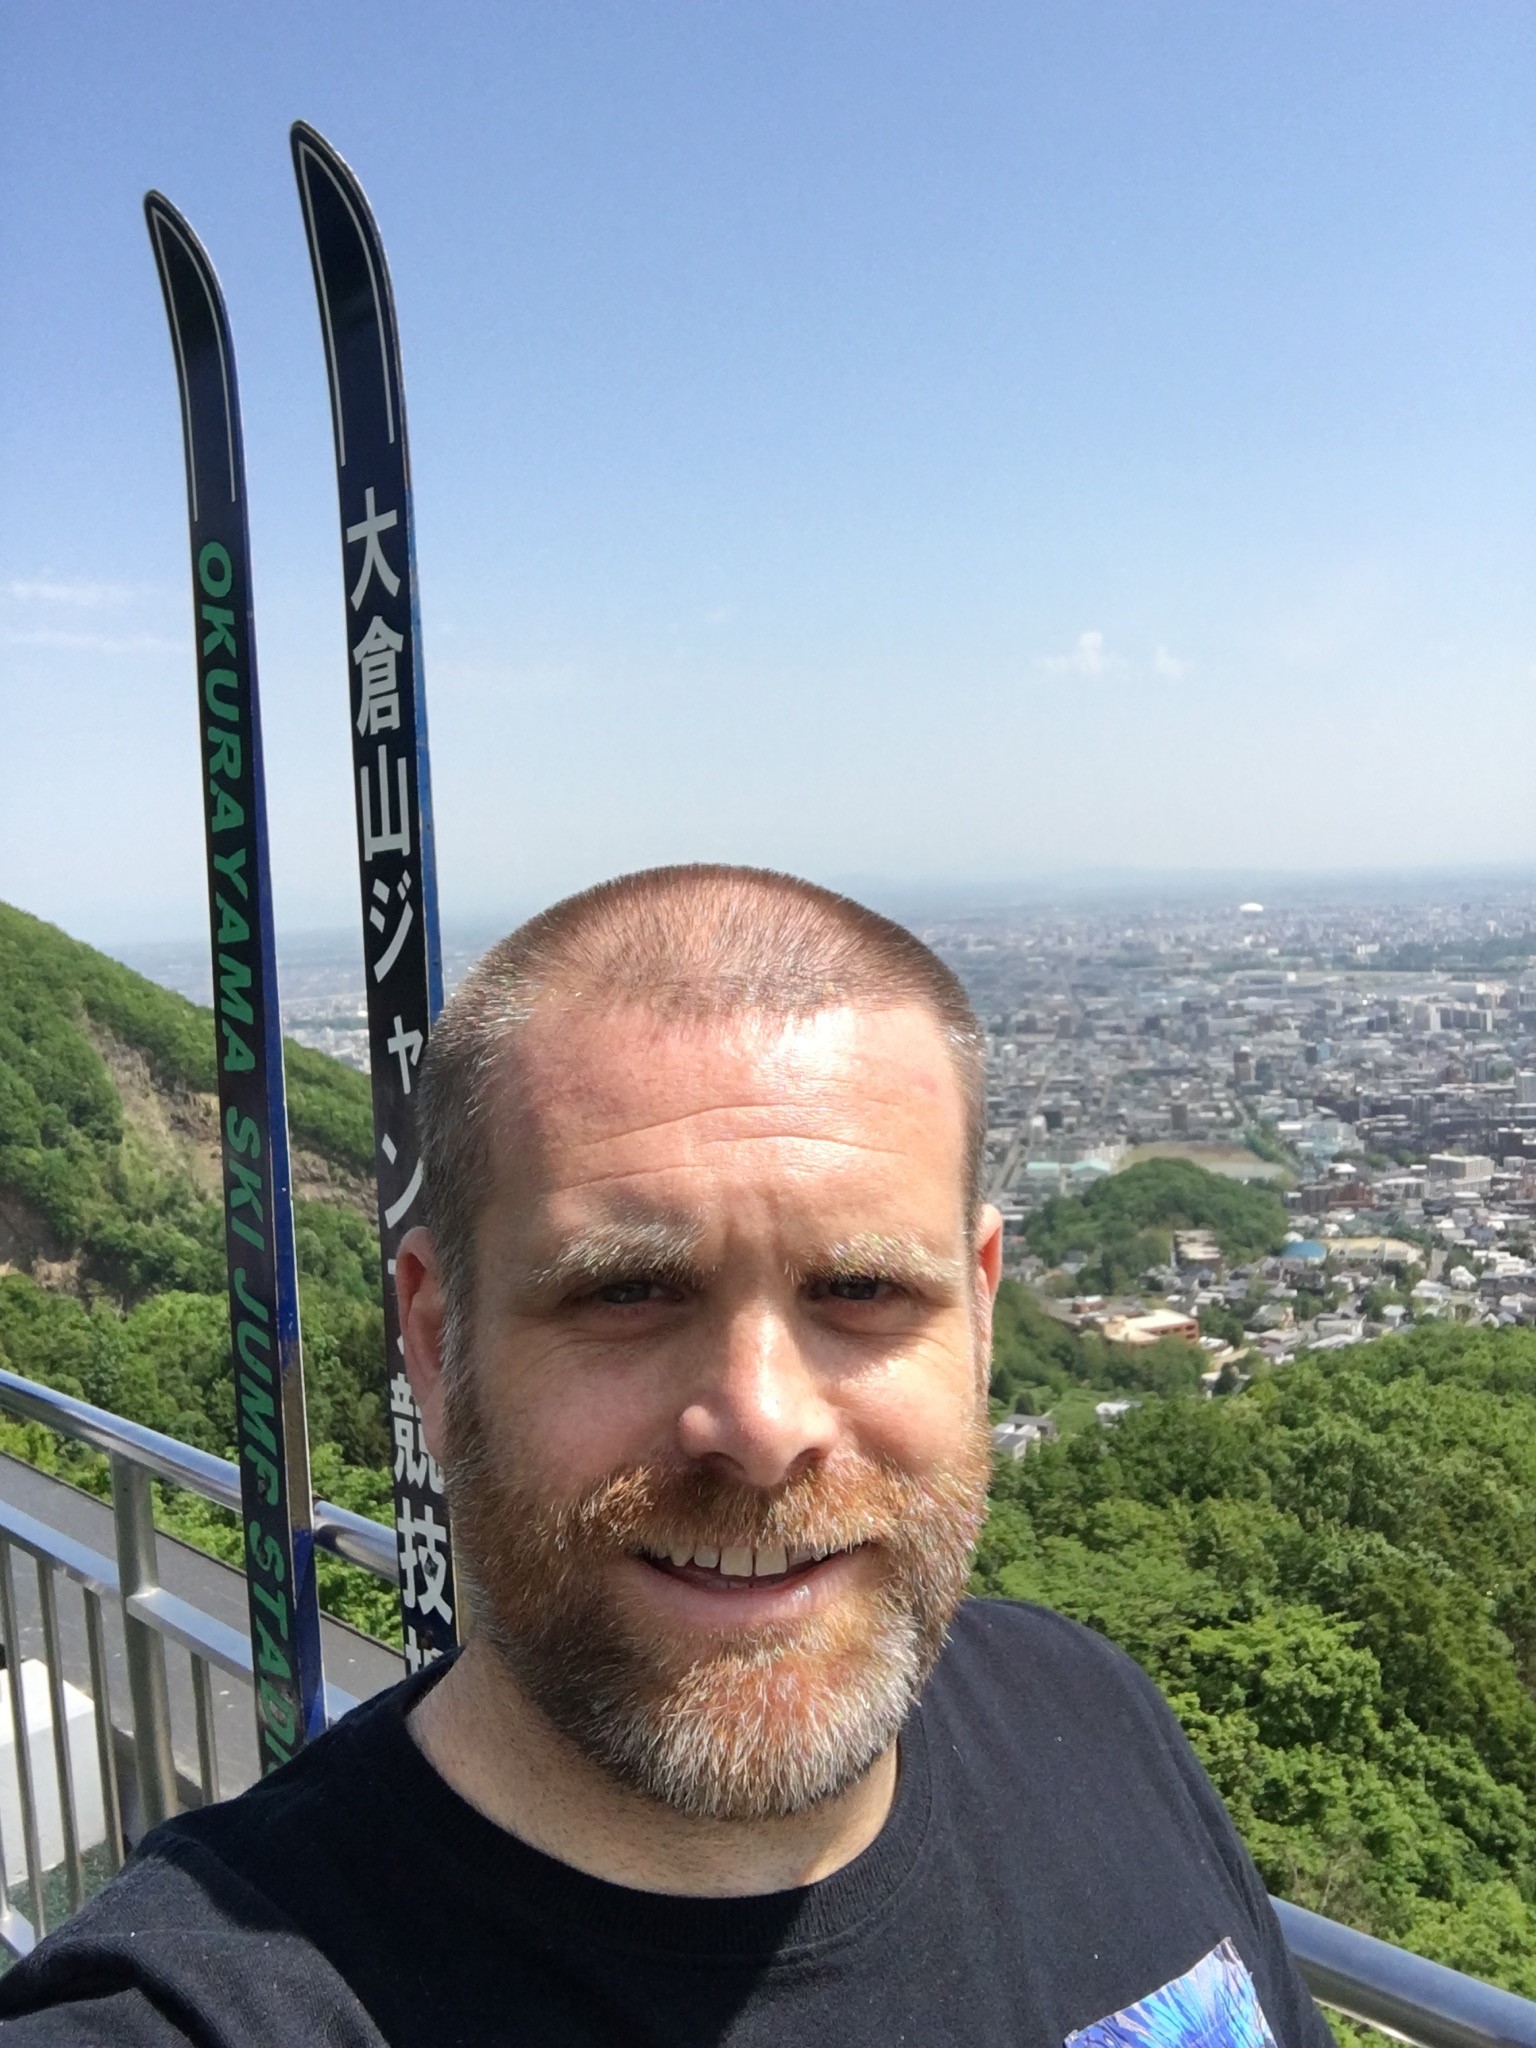 Selfie at the top of the ski jump used for the Winter Olympics in Saporro 1972.